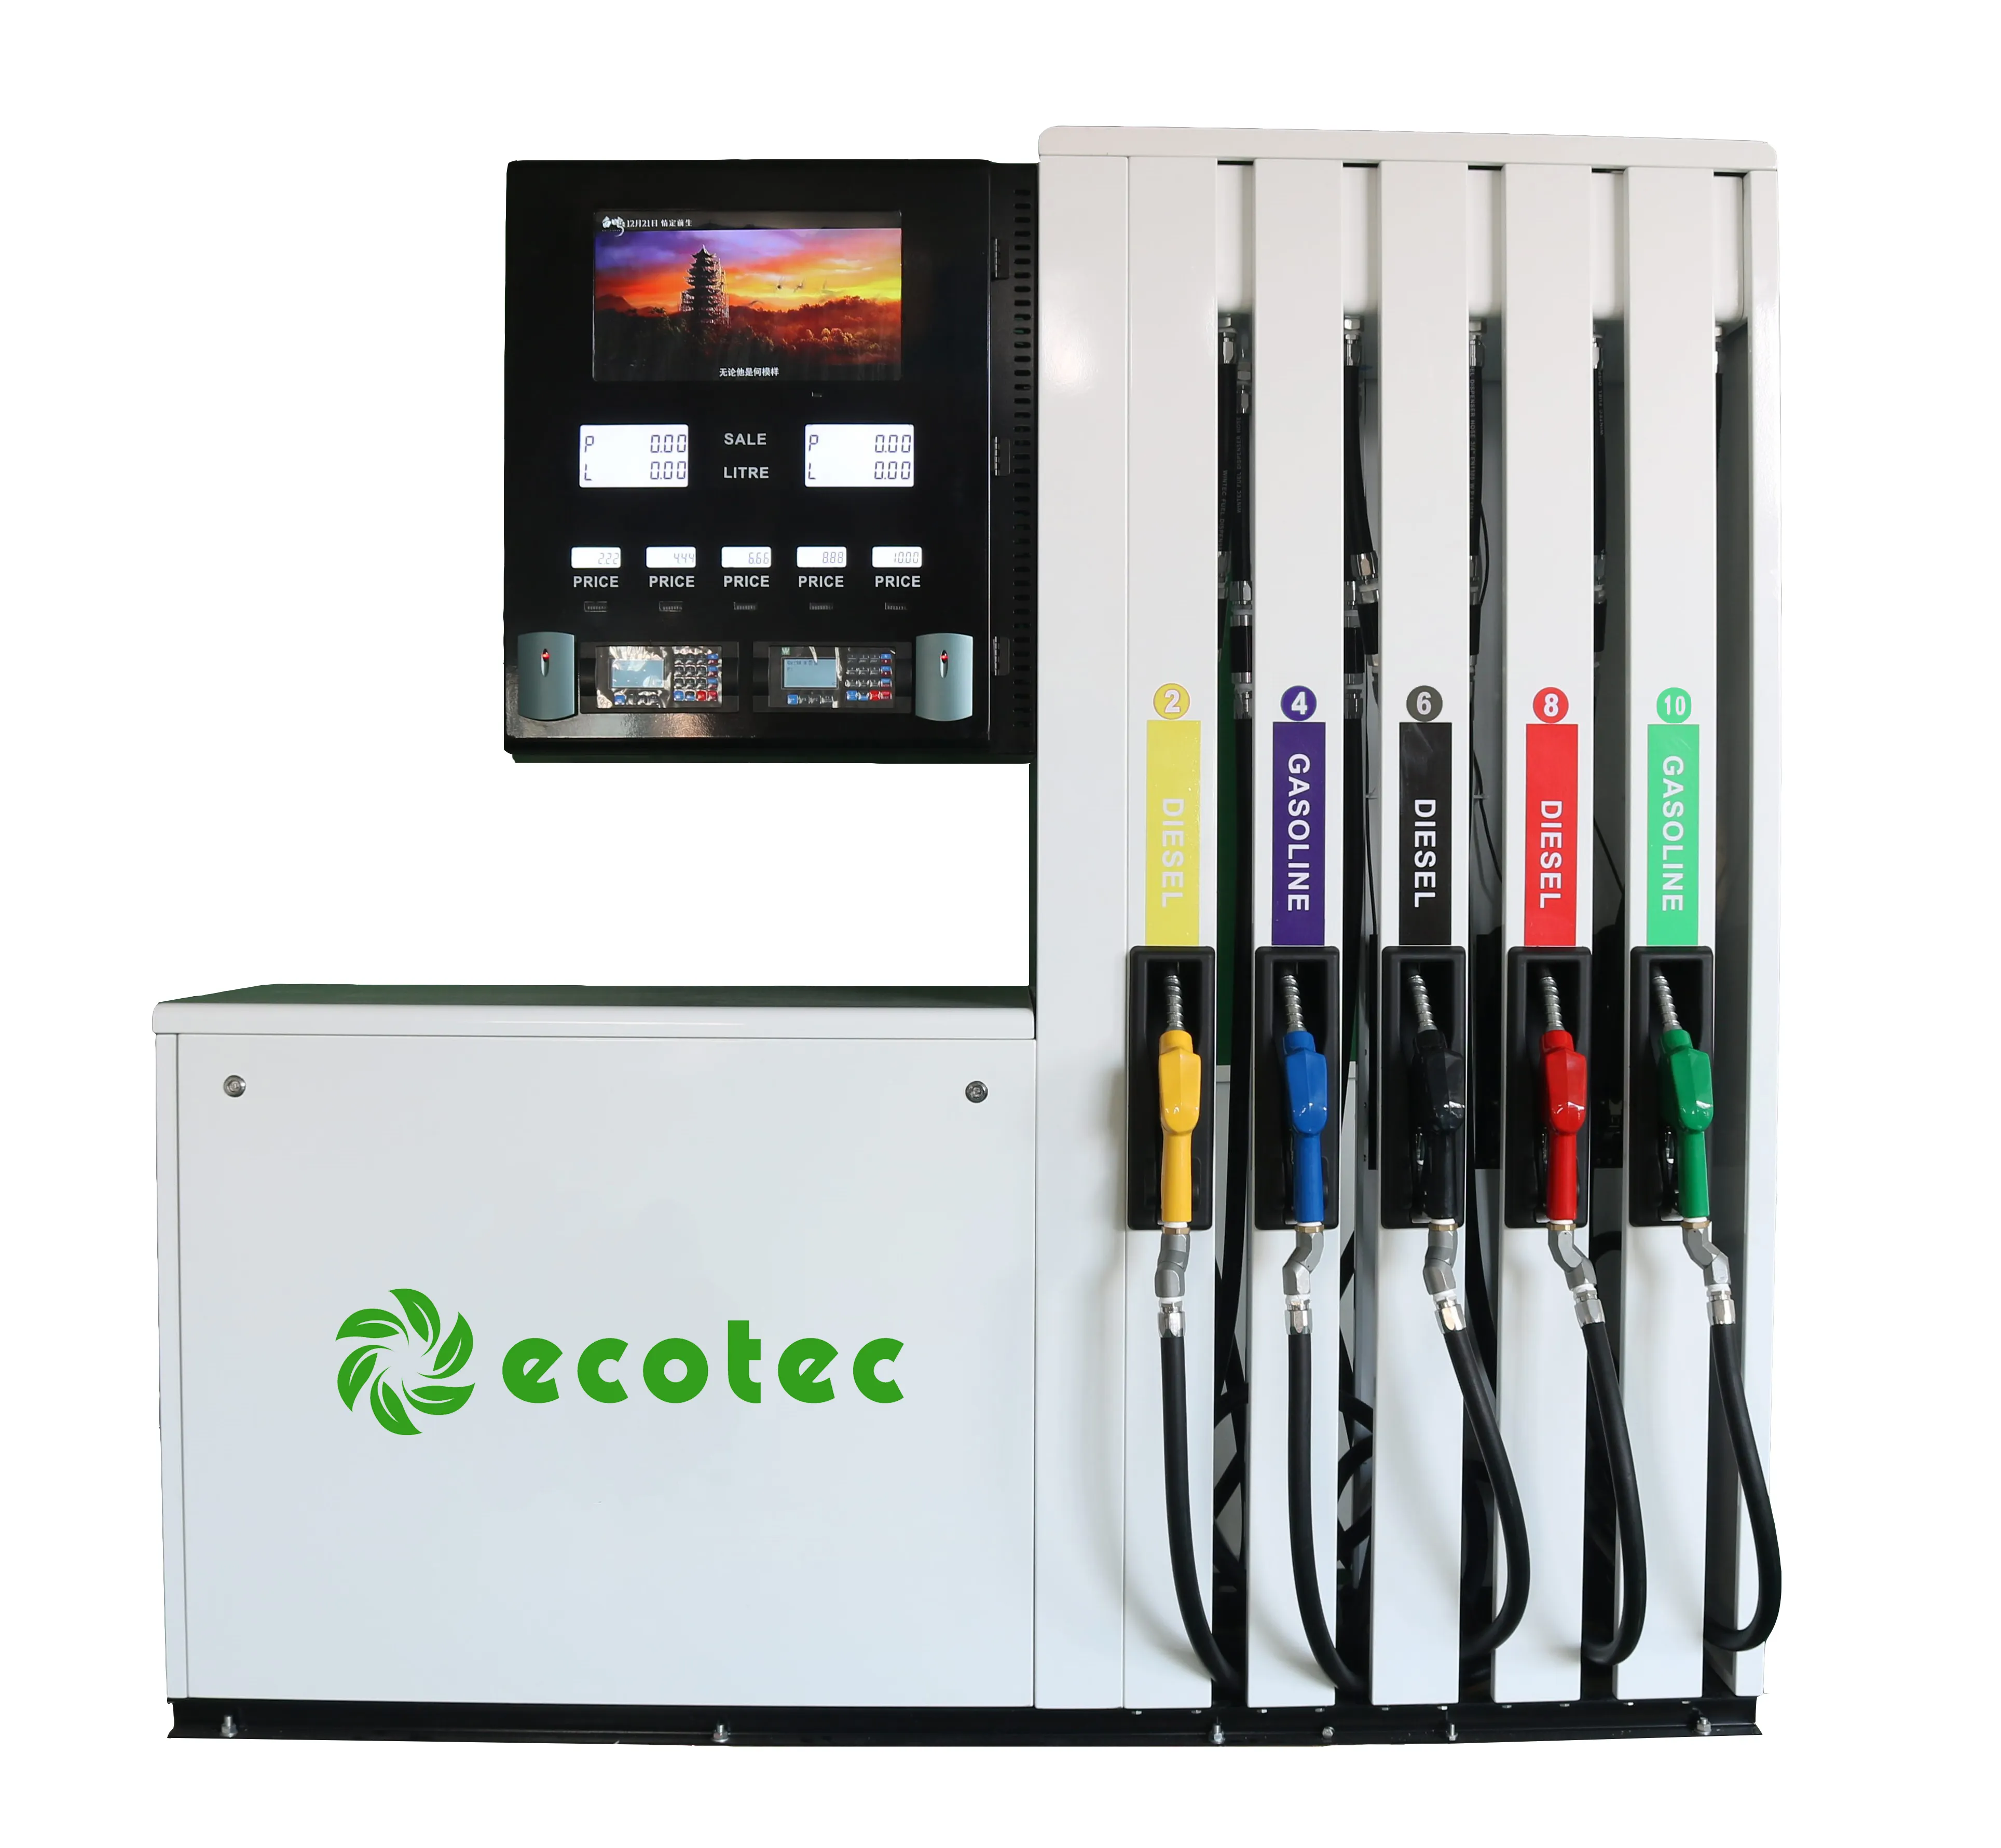 Ecotec 10 NOZZLE Petrol Station Diesel & Fuel Dispenser Price for Gasoline With ID Card